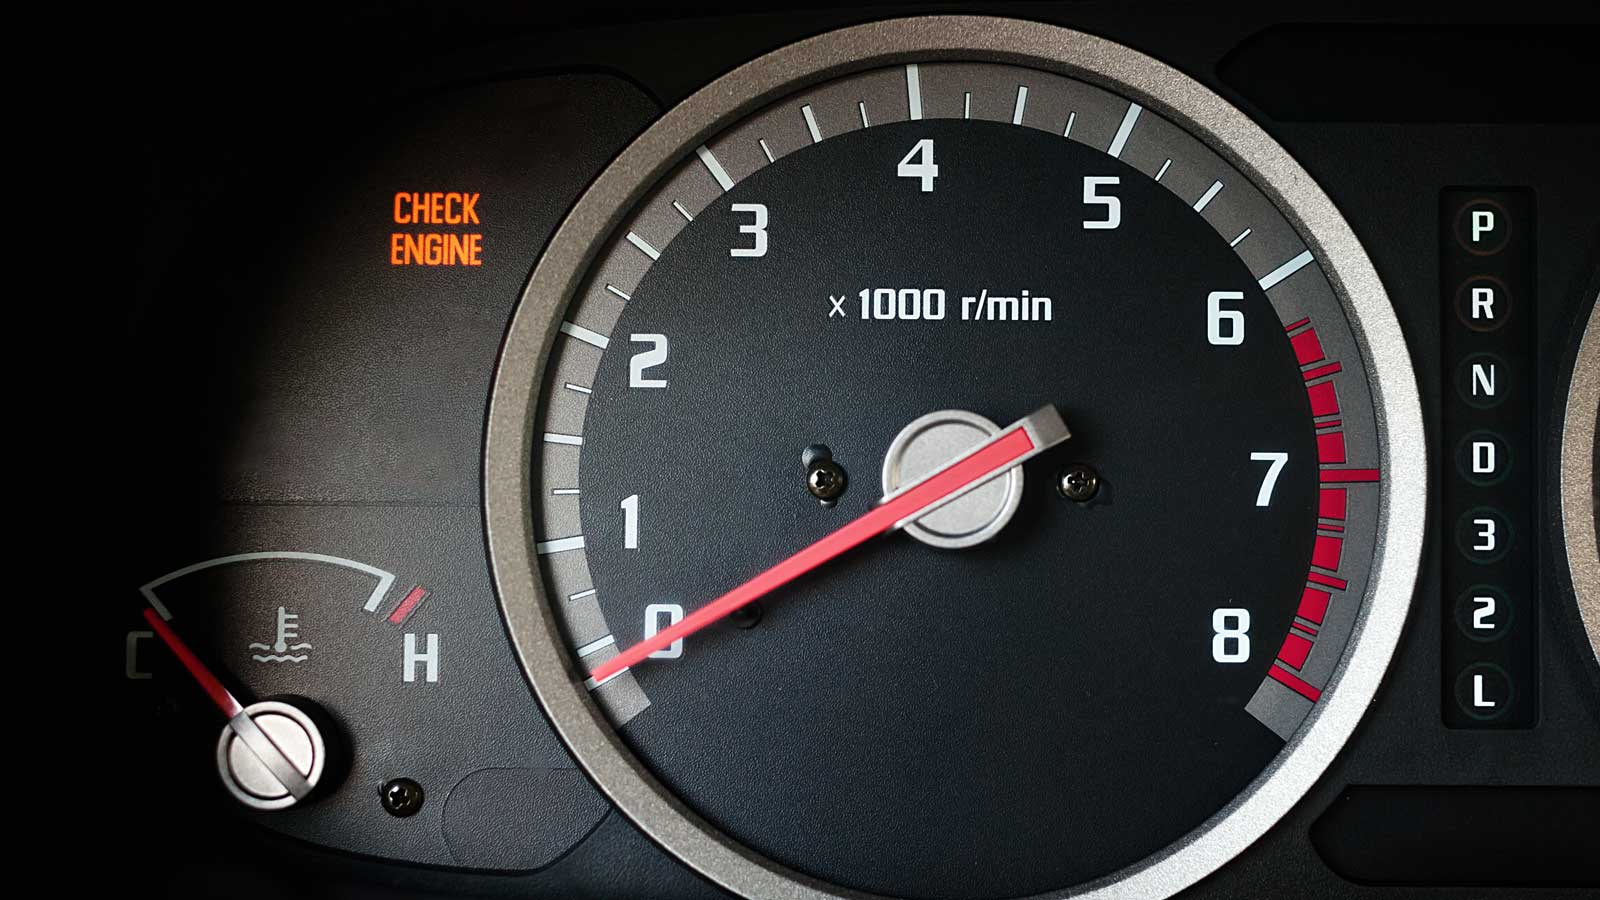 Check Engine Light Is On